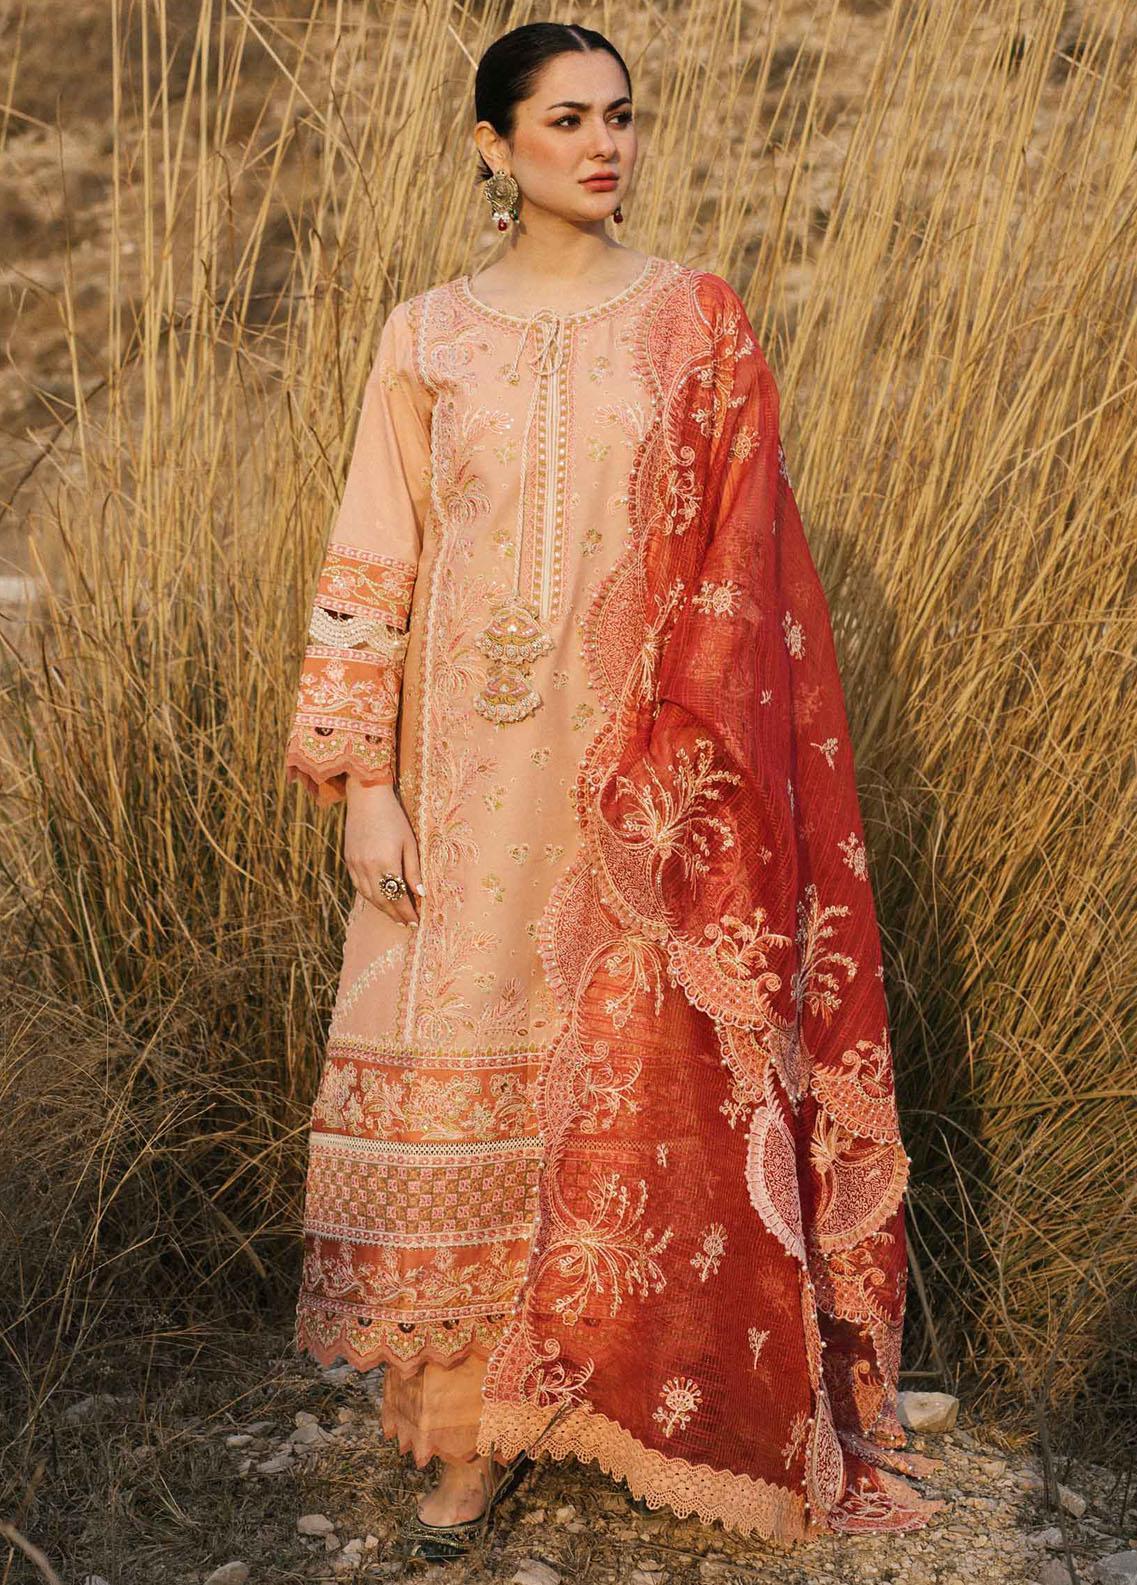 Marahil By Qalamkar Embroidered Lawn Suit Unstitched 3 Piece 08 Sefa QML22 - Summer Collection